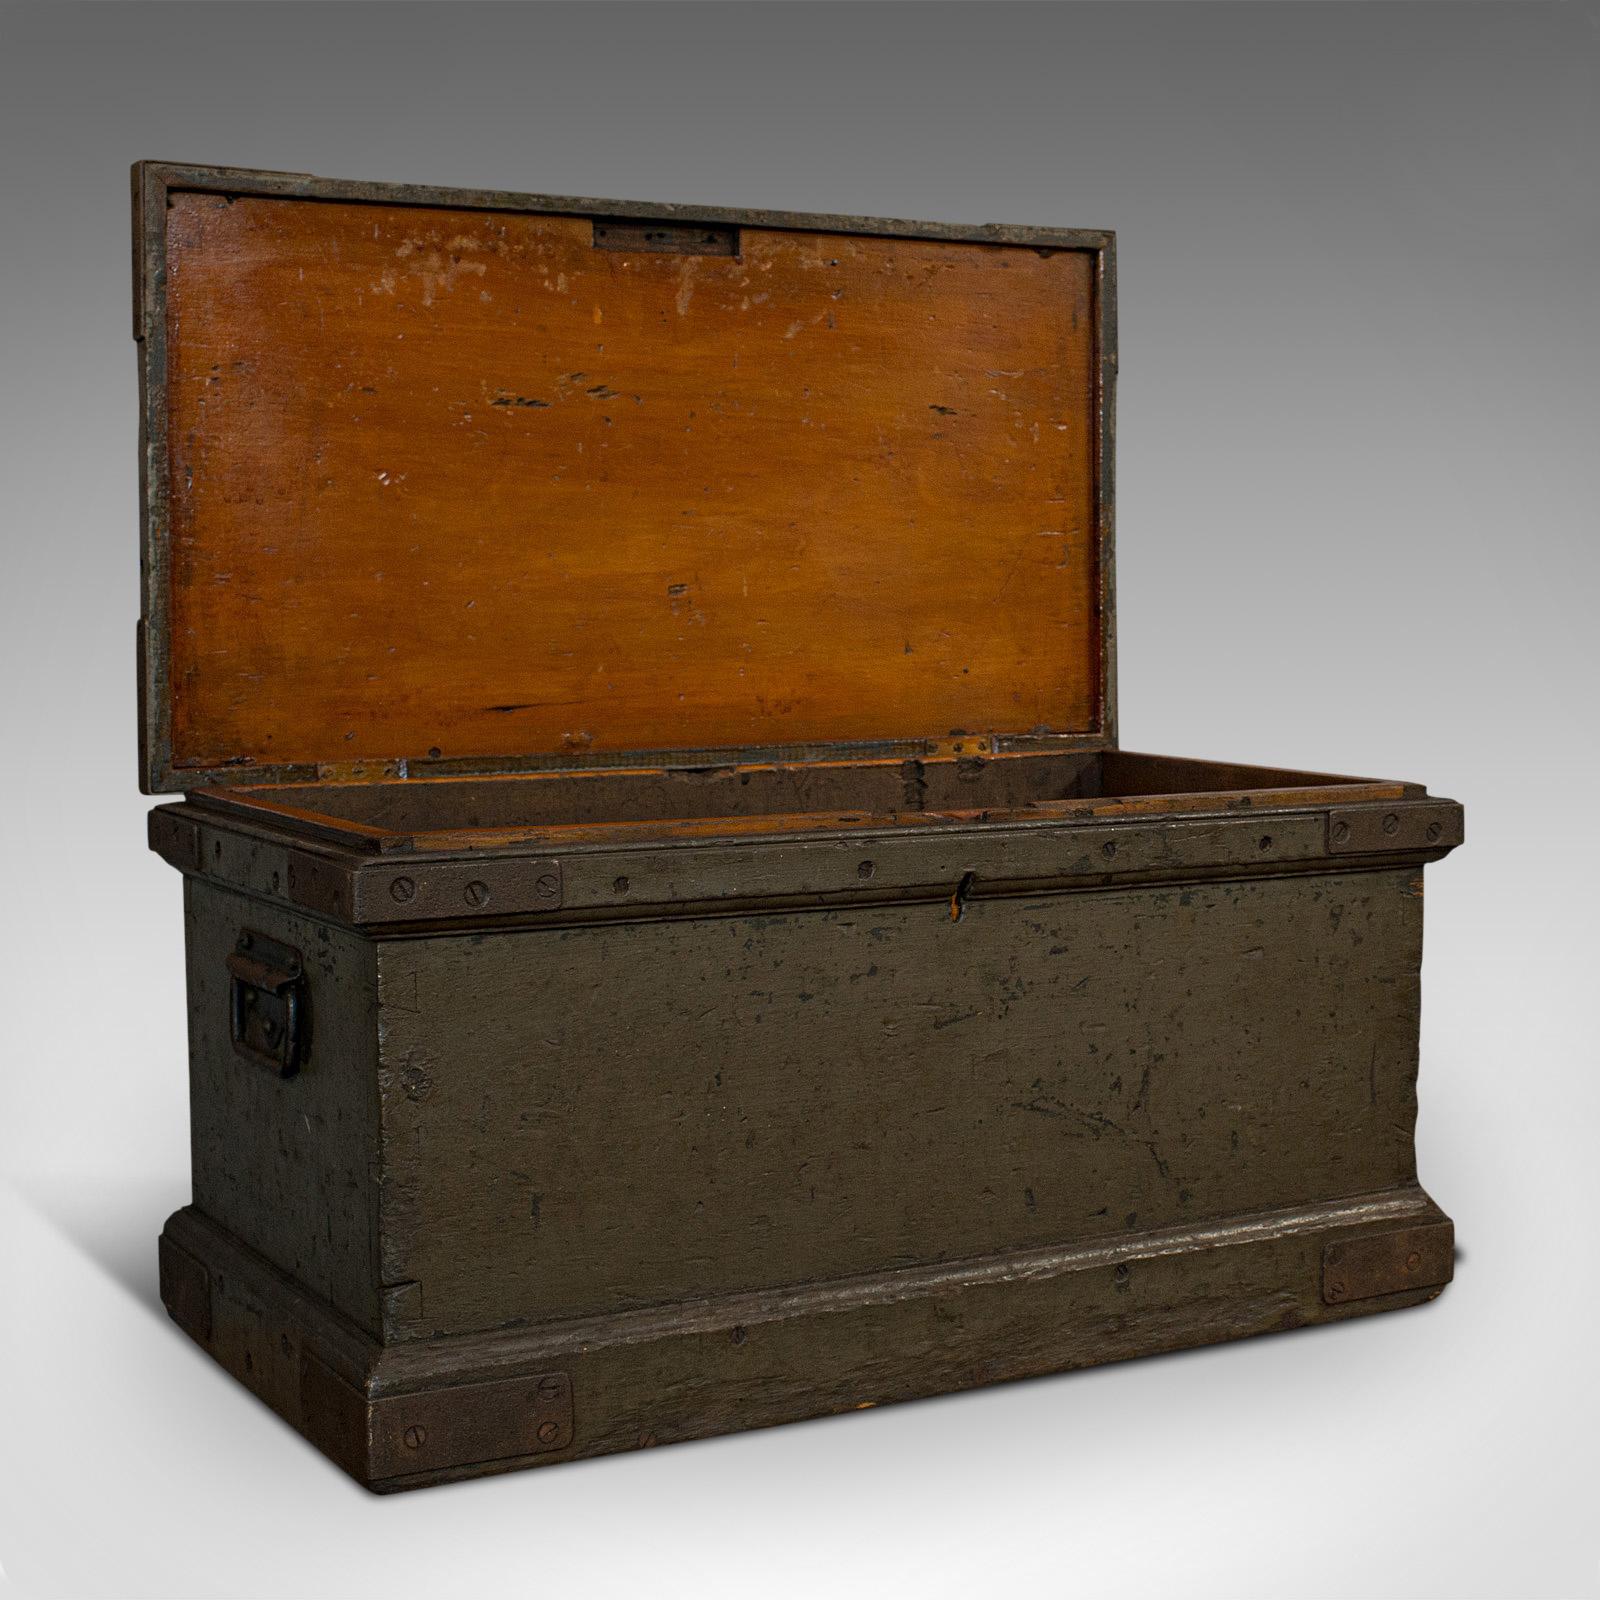 This is an antique workman's trunk. An English, pine carriage chest, dating to the Victorian period, circa 1880.

Appealing dark finish and solid feel
Displays a desirable aged patina
Stout pine stocks finished with deep charcoal hues
Flat top